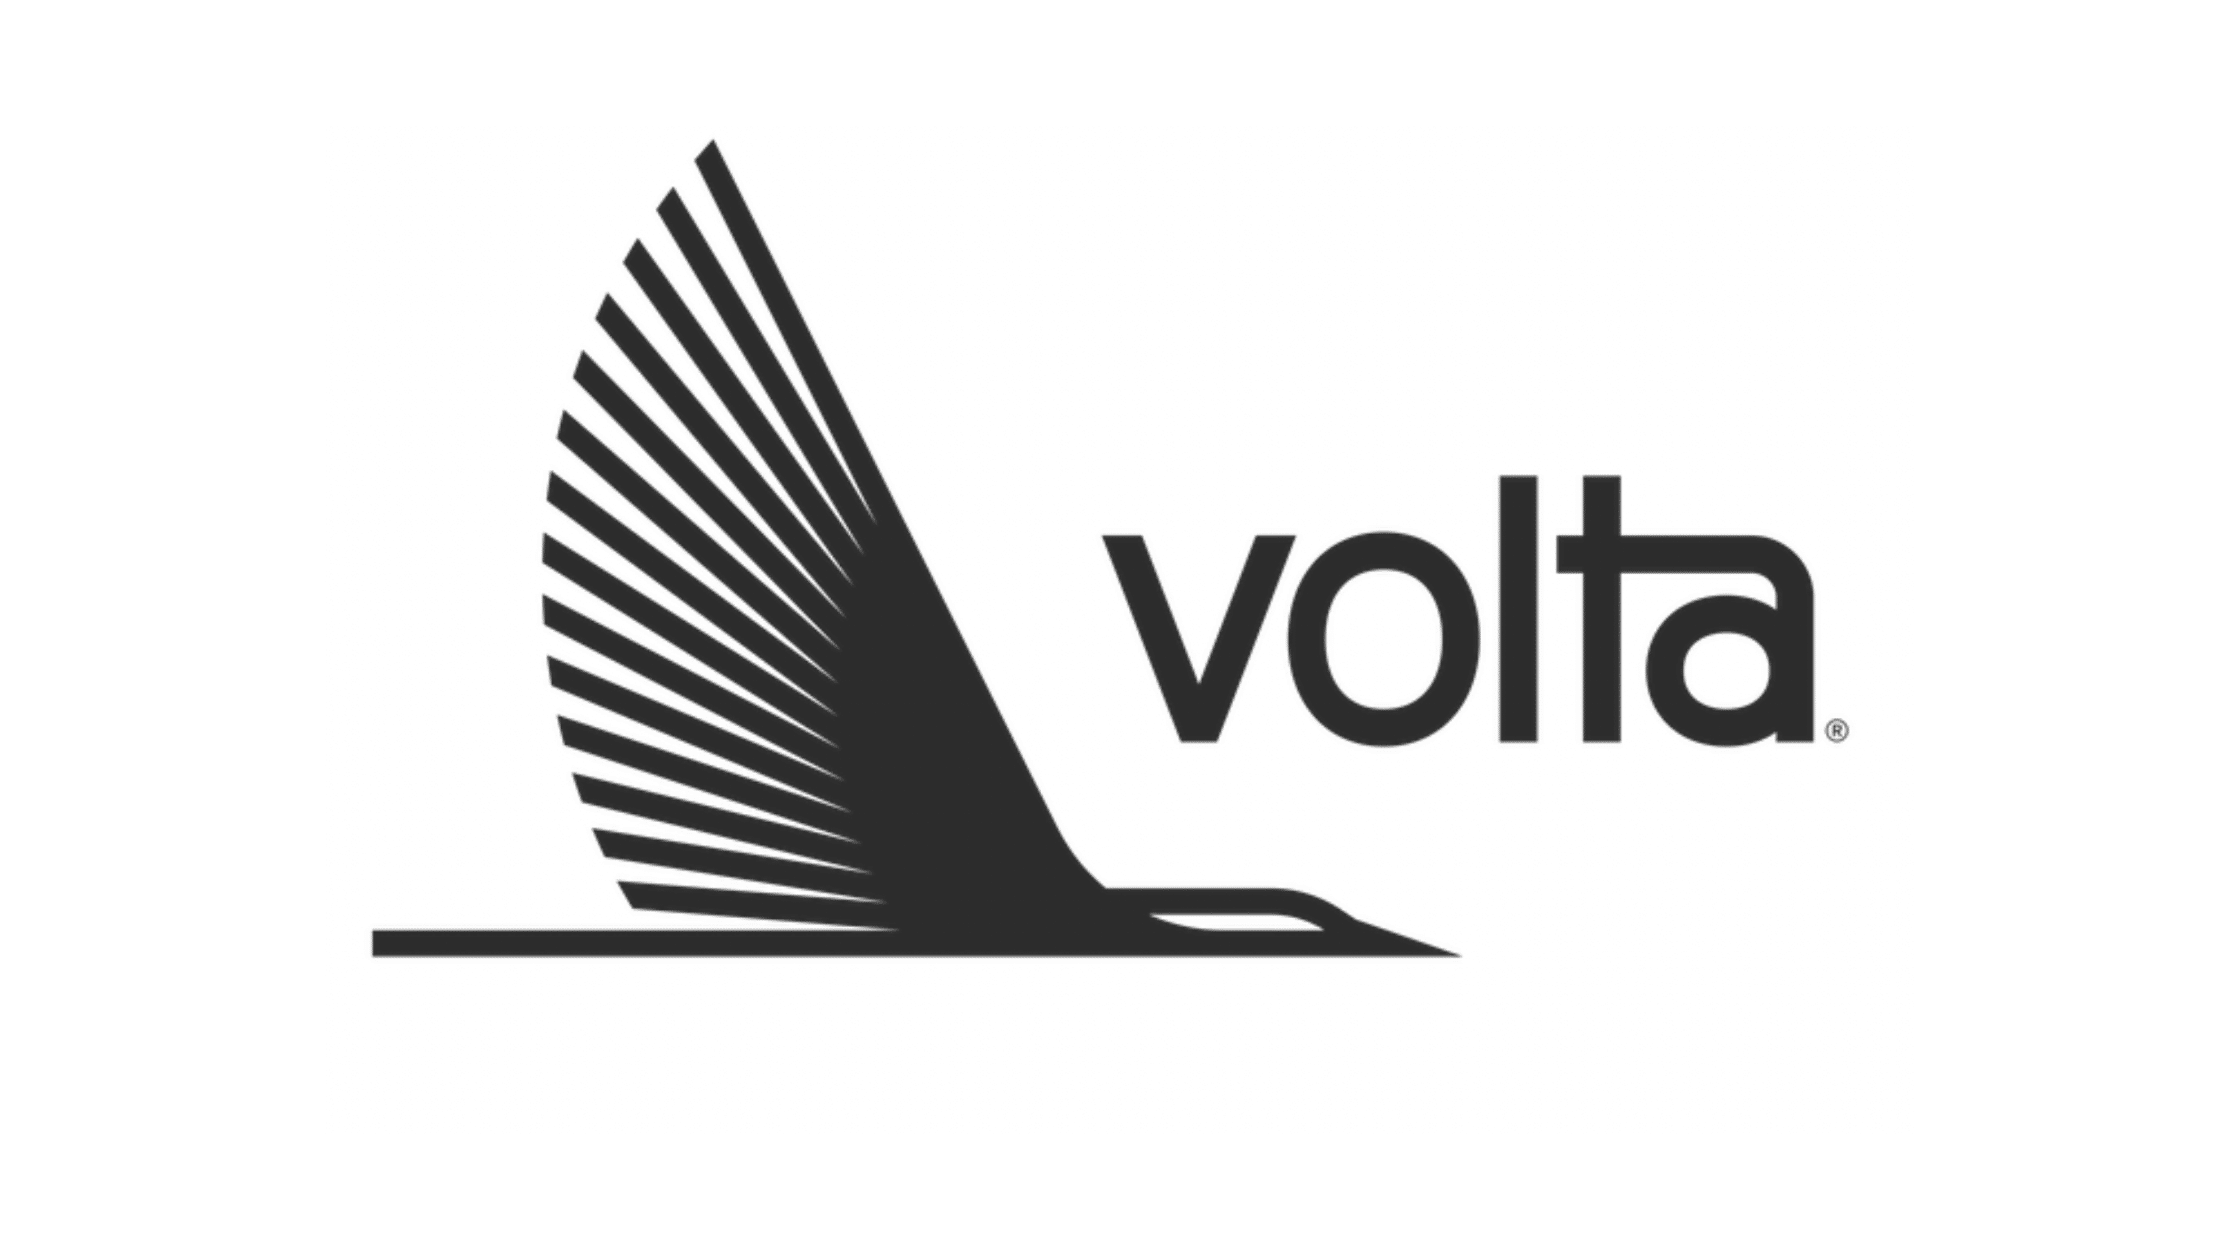 Volta Launches PredictEV® Fleet Product to Accelerate Transition of Commercial Fleets to Electric Vehicles